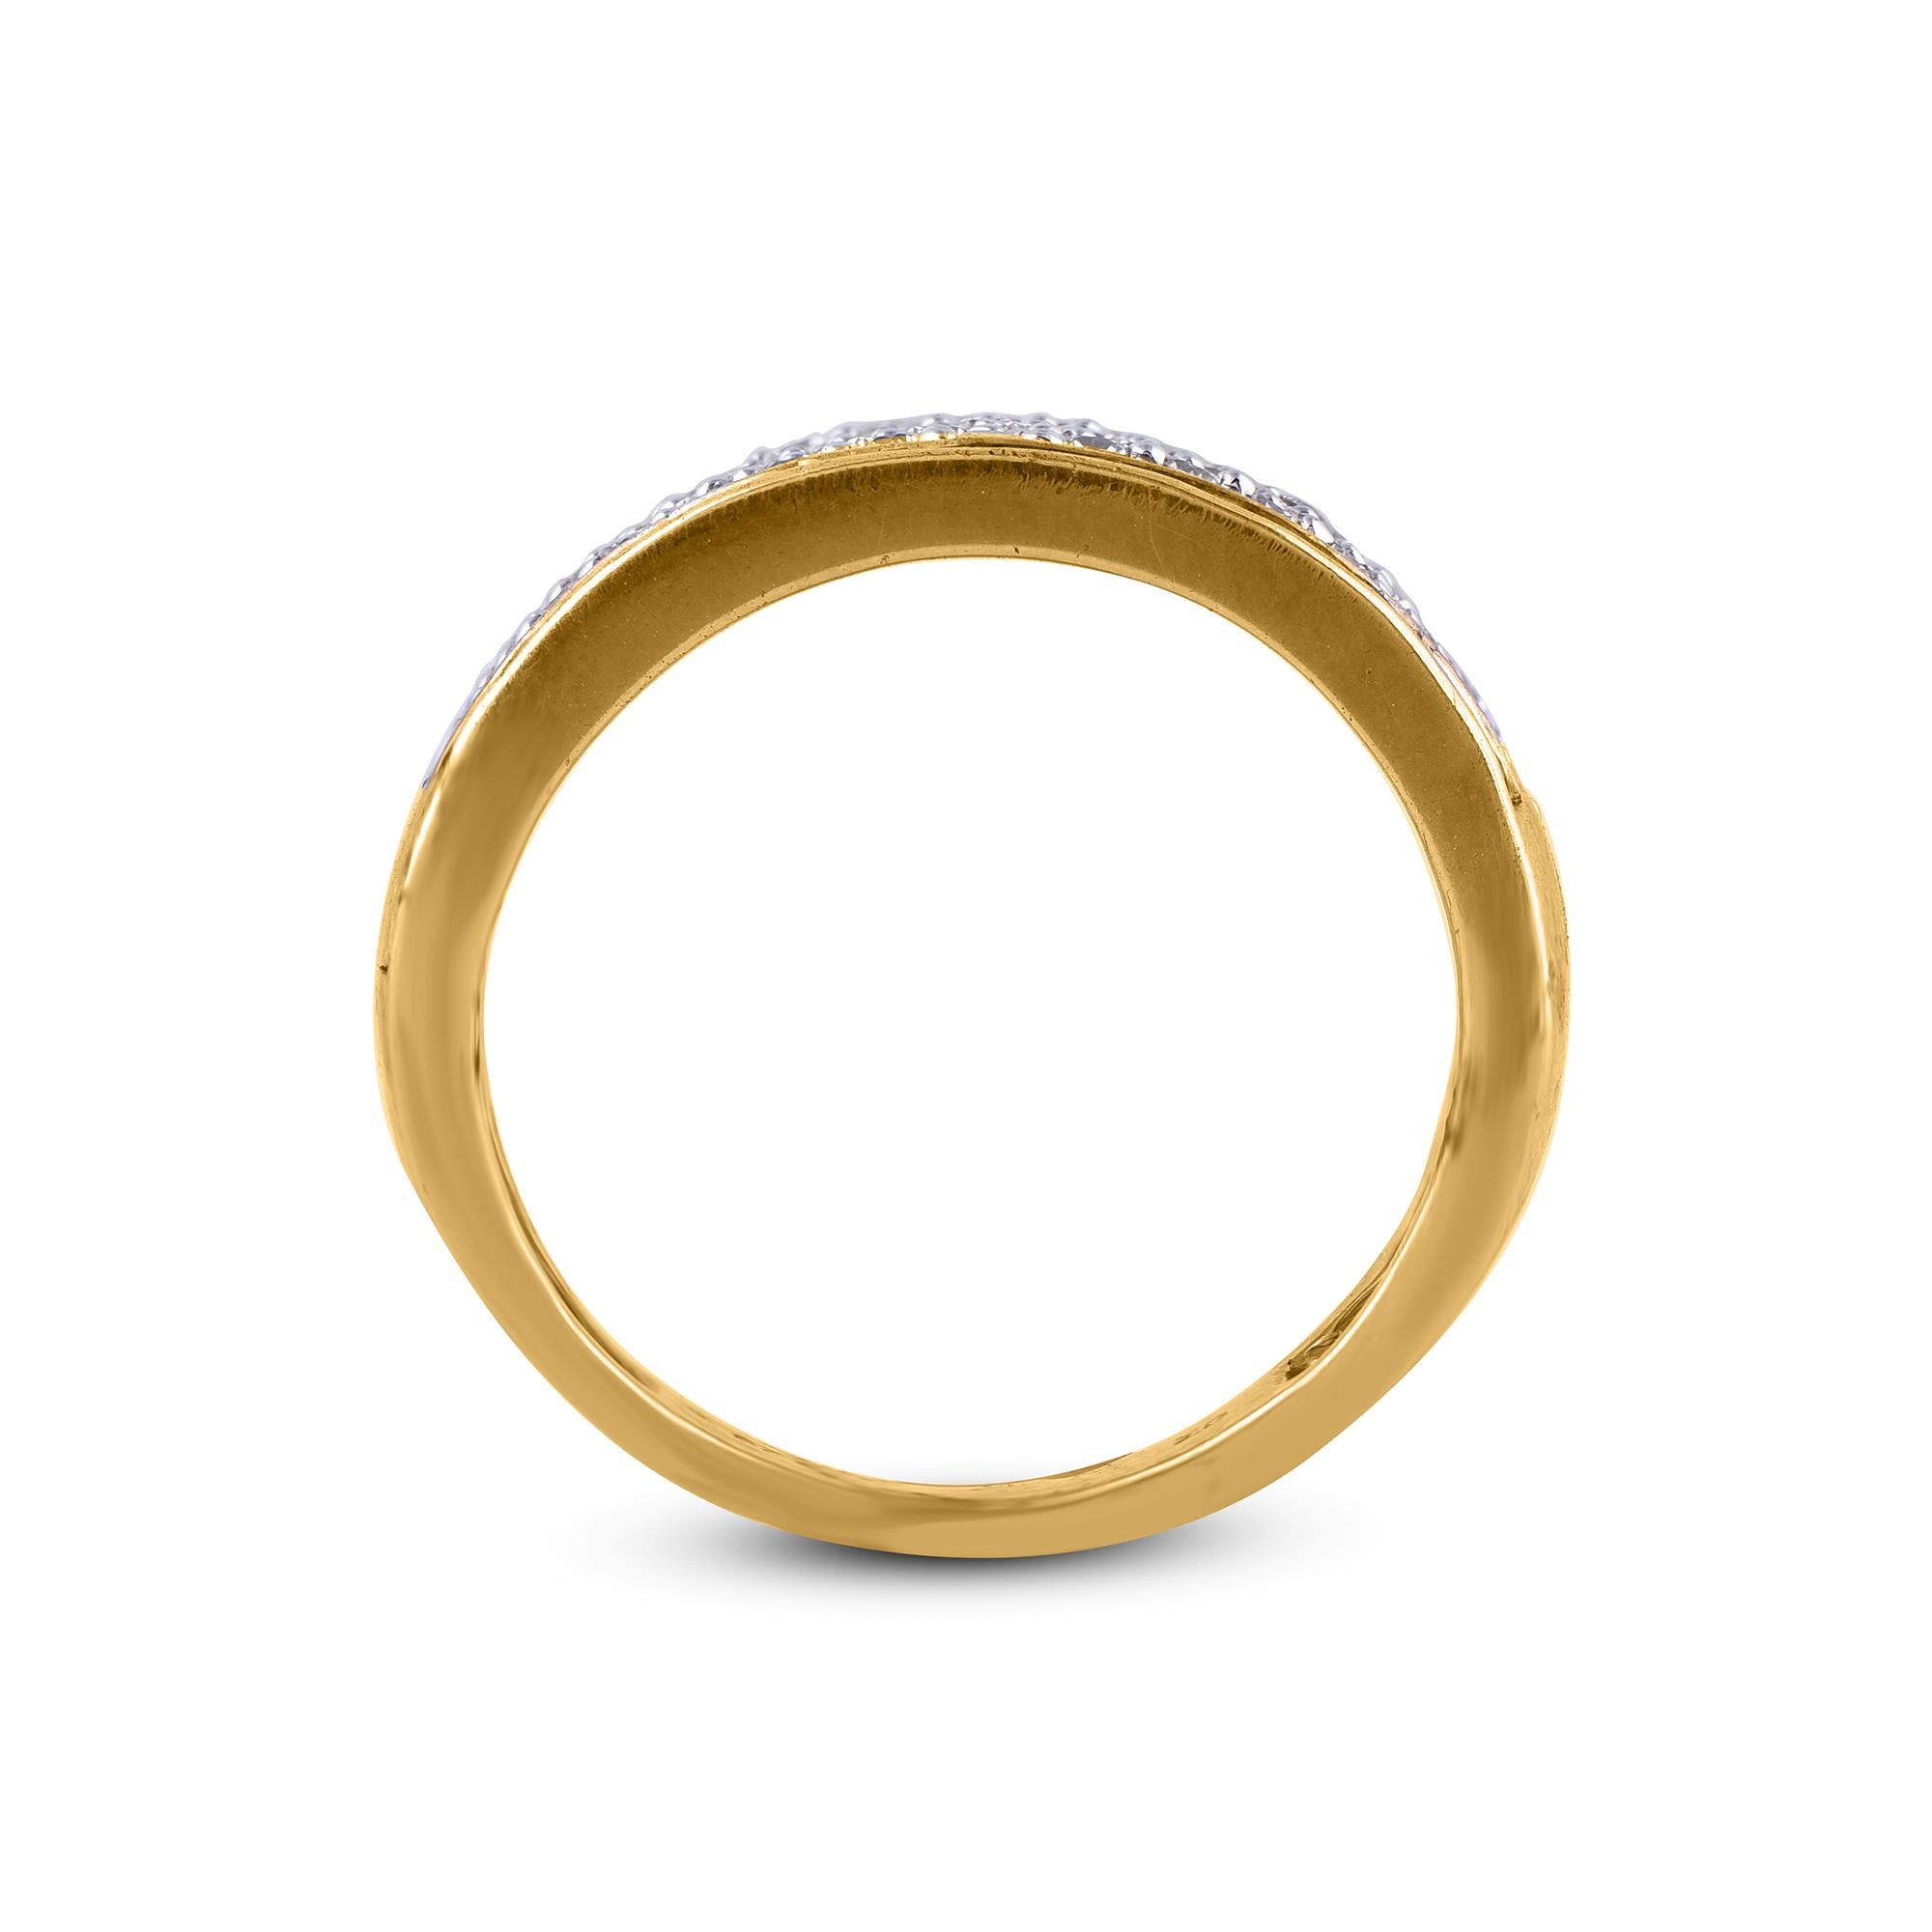 TJD 1.0 Carat Natural Round Diamond Wedding Band Ring in 14 Karat Yellow Gold In New Condition For Sale In New York, NY